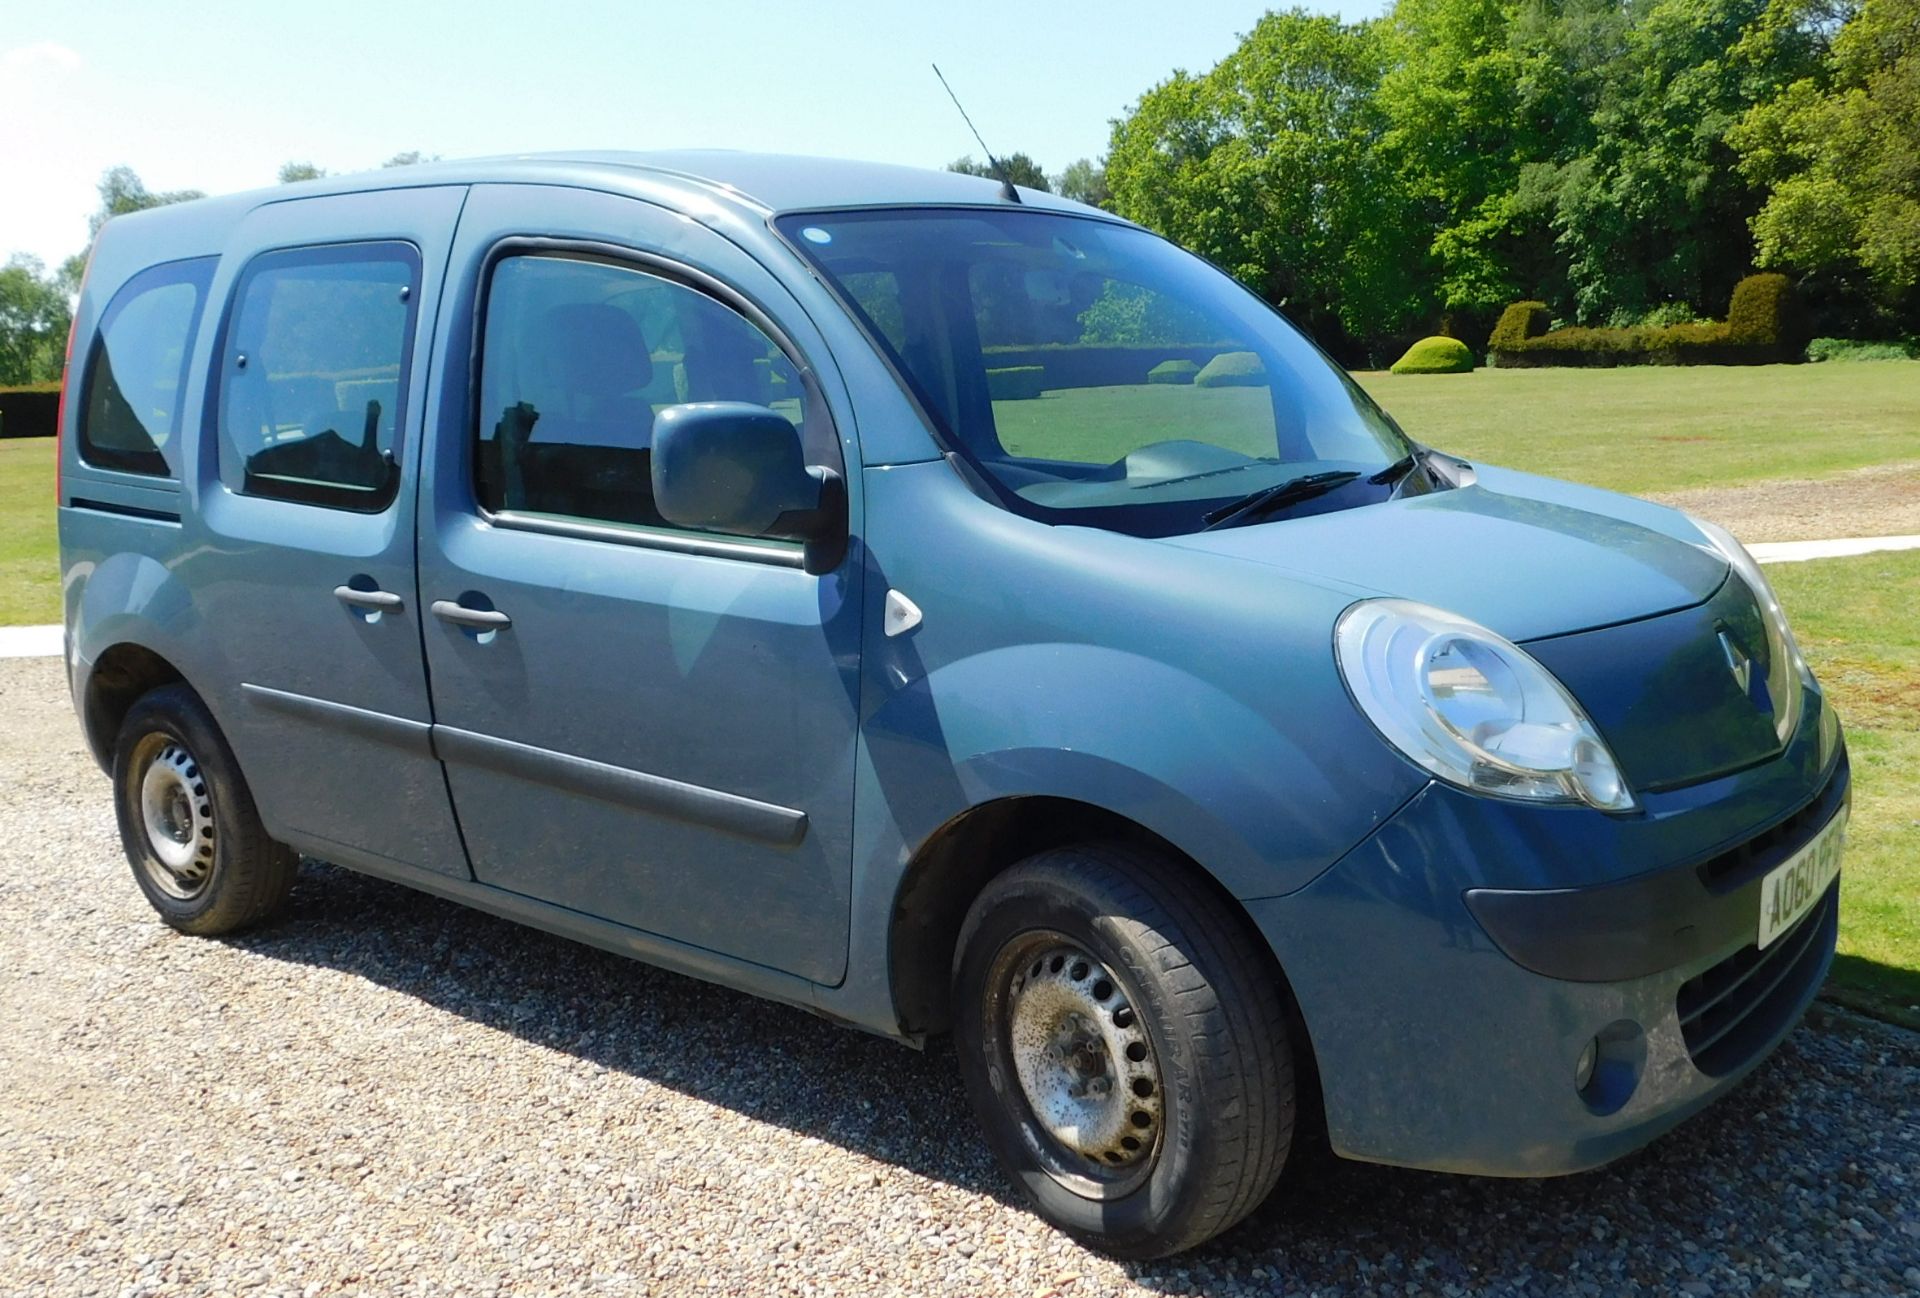 Renault Kangoo 1.45 DCi 110 Expression, Registration AO60 PFD, First Registered 26th November